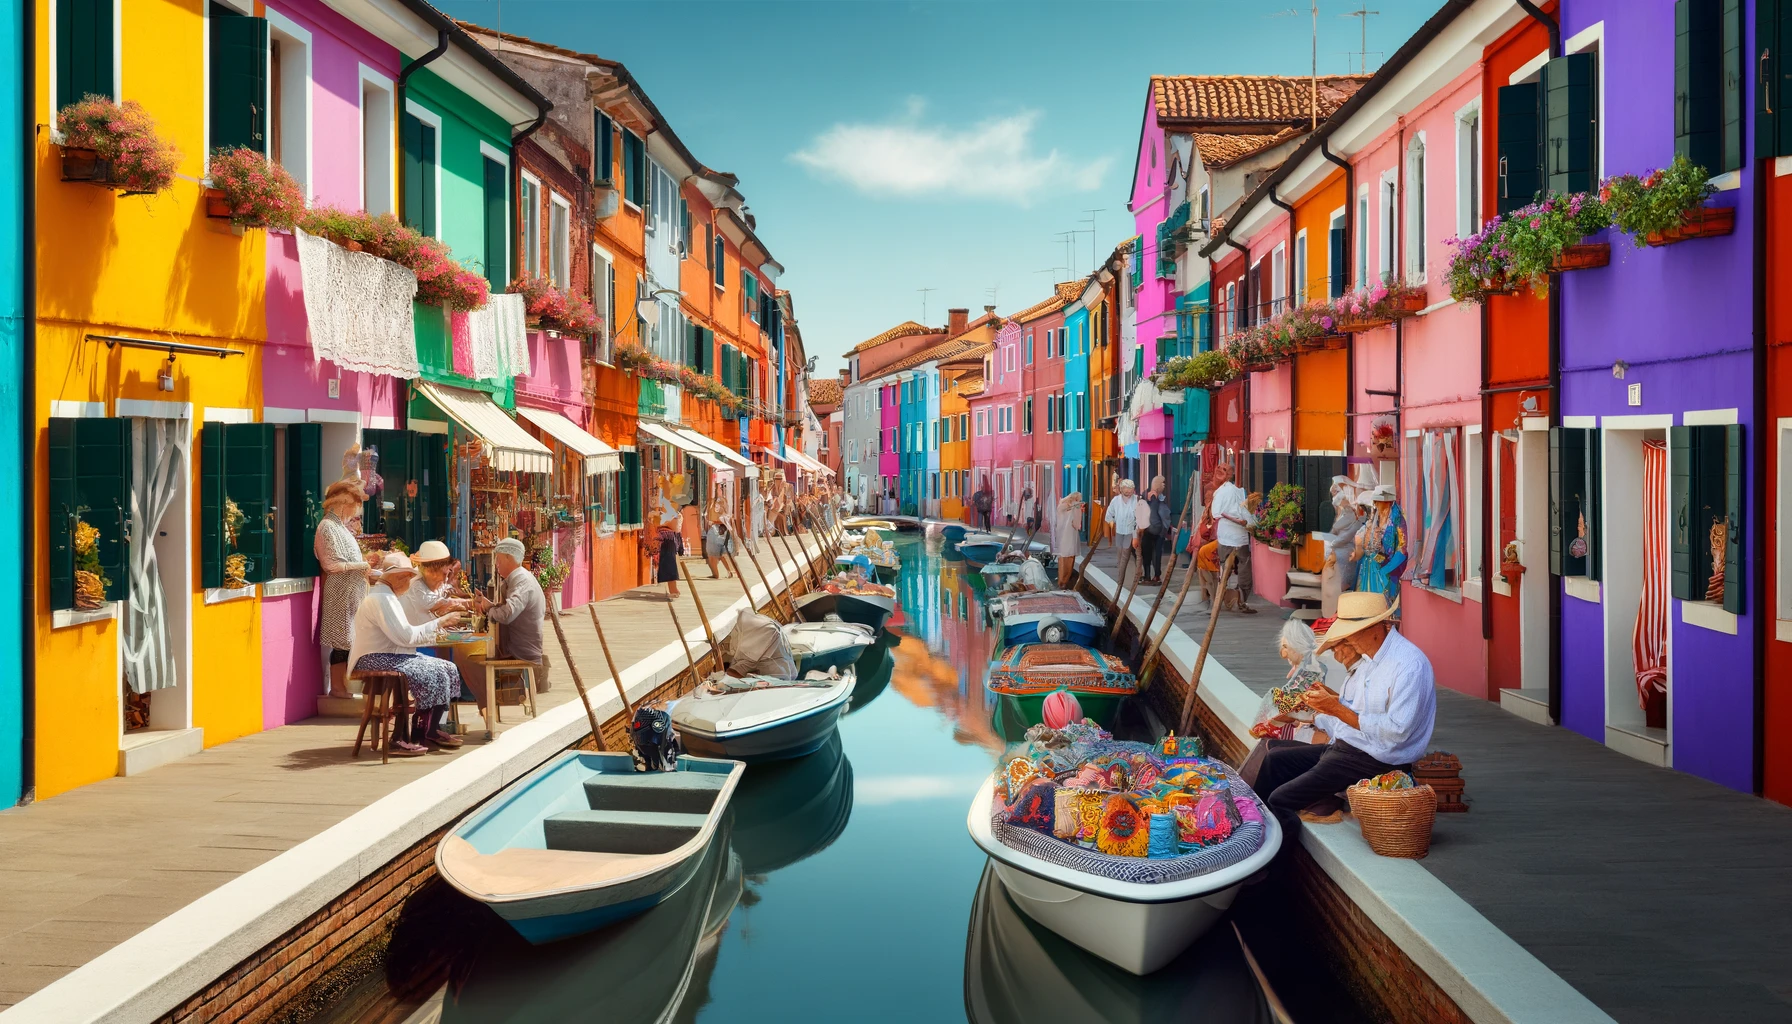 The Charm of Burano: Among Colorful Houses and Lace